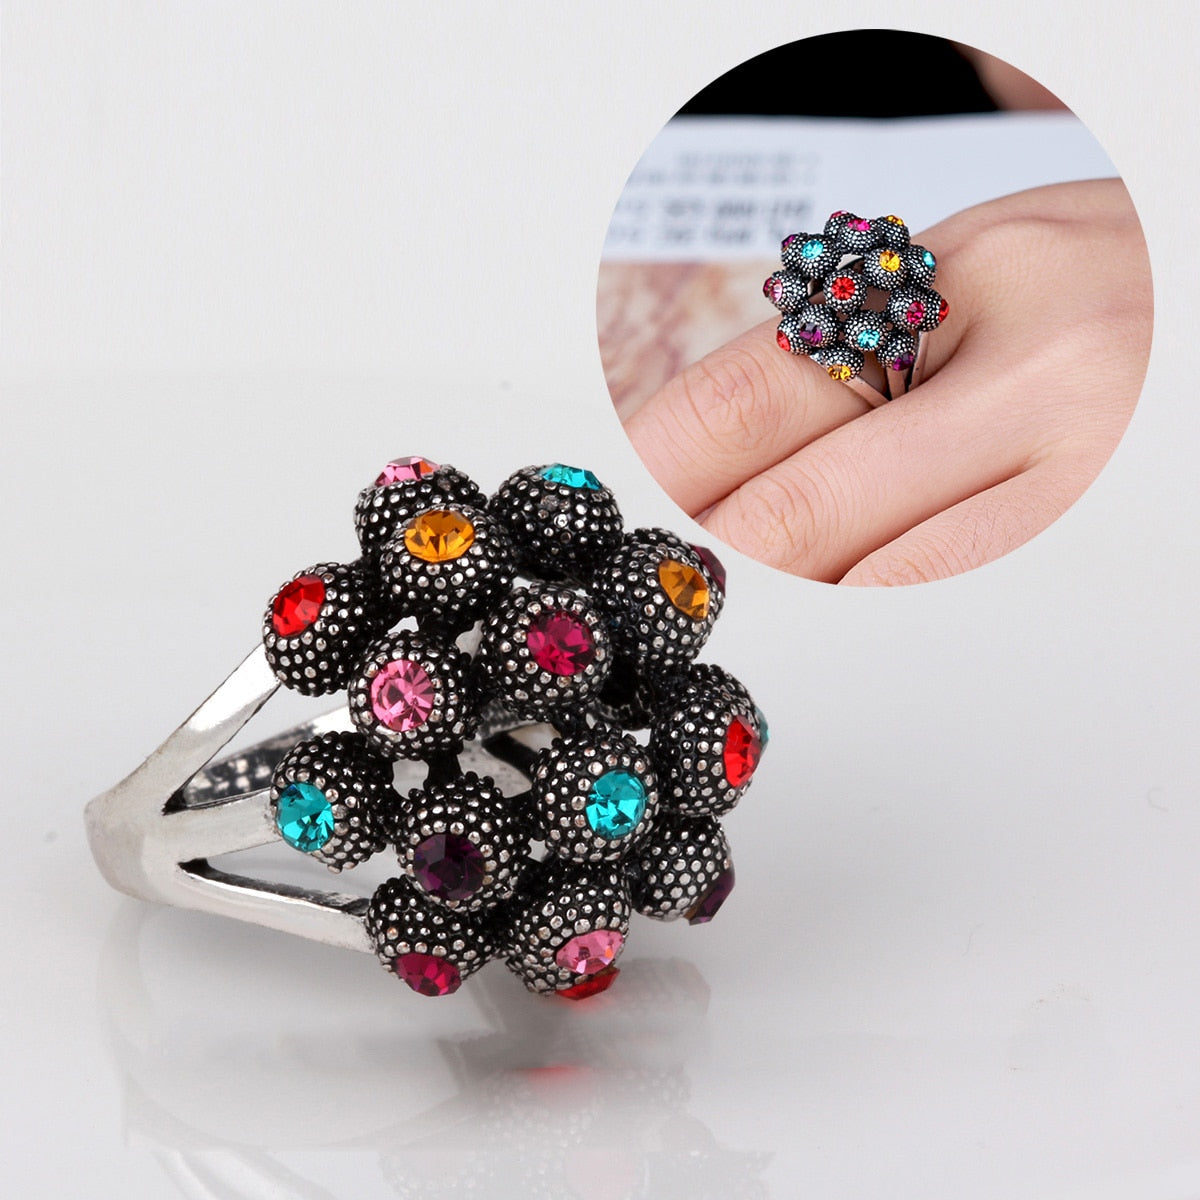 Fashion Enamel Metal Gold Rings Unique Fine Jewelry Scarves Pink Black Painted Flower Ring Gifts For Women Girls Perfect Quality